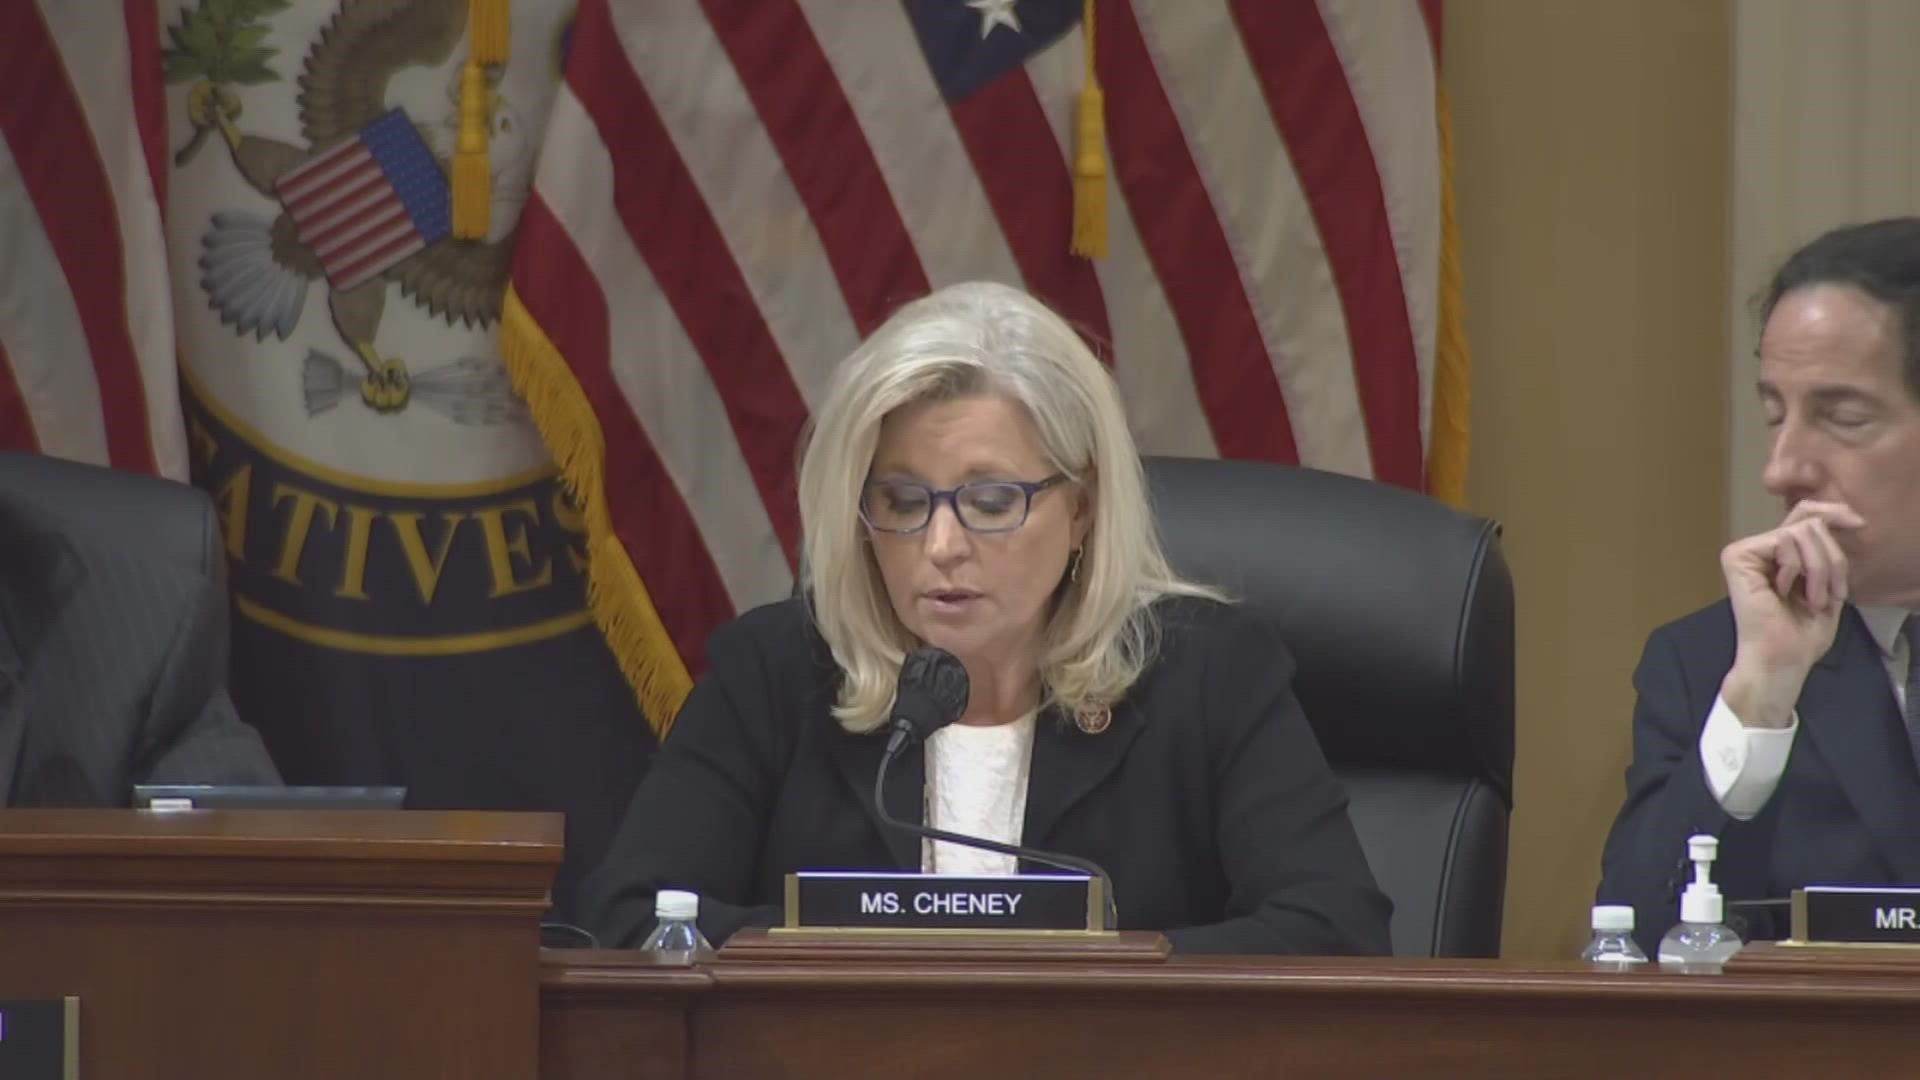 Rep. Liz Cheney said the Justice Department has been notified.